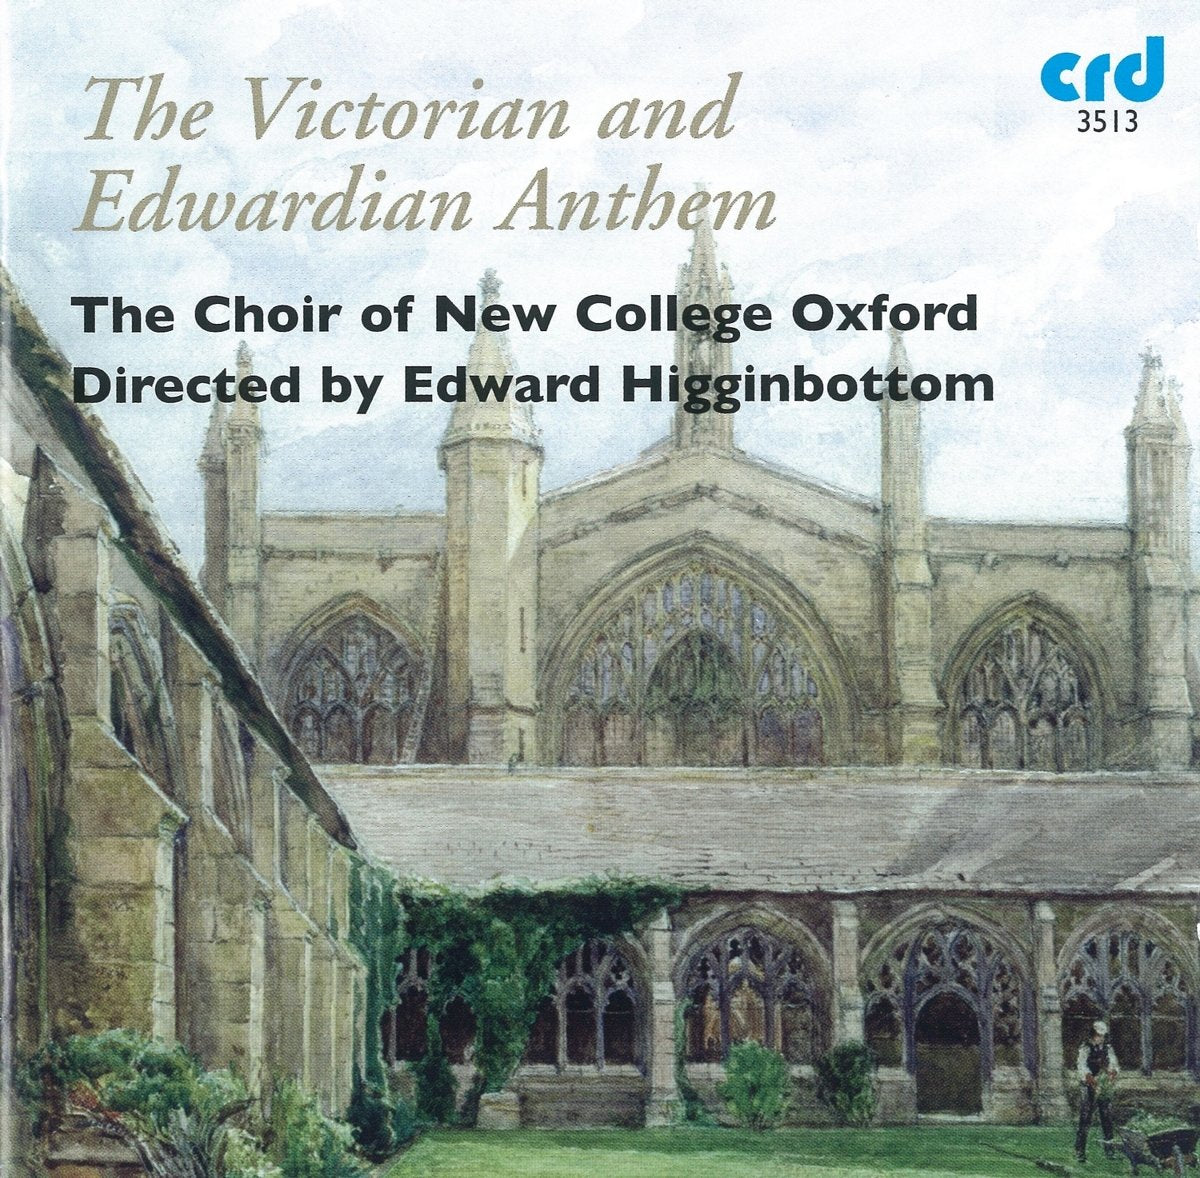 THE VICTORIAN AND EDWARDIAN ANTHEM: NEW COLLEGE OXFORD, EDWARD HIGGINBOTTOM